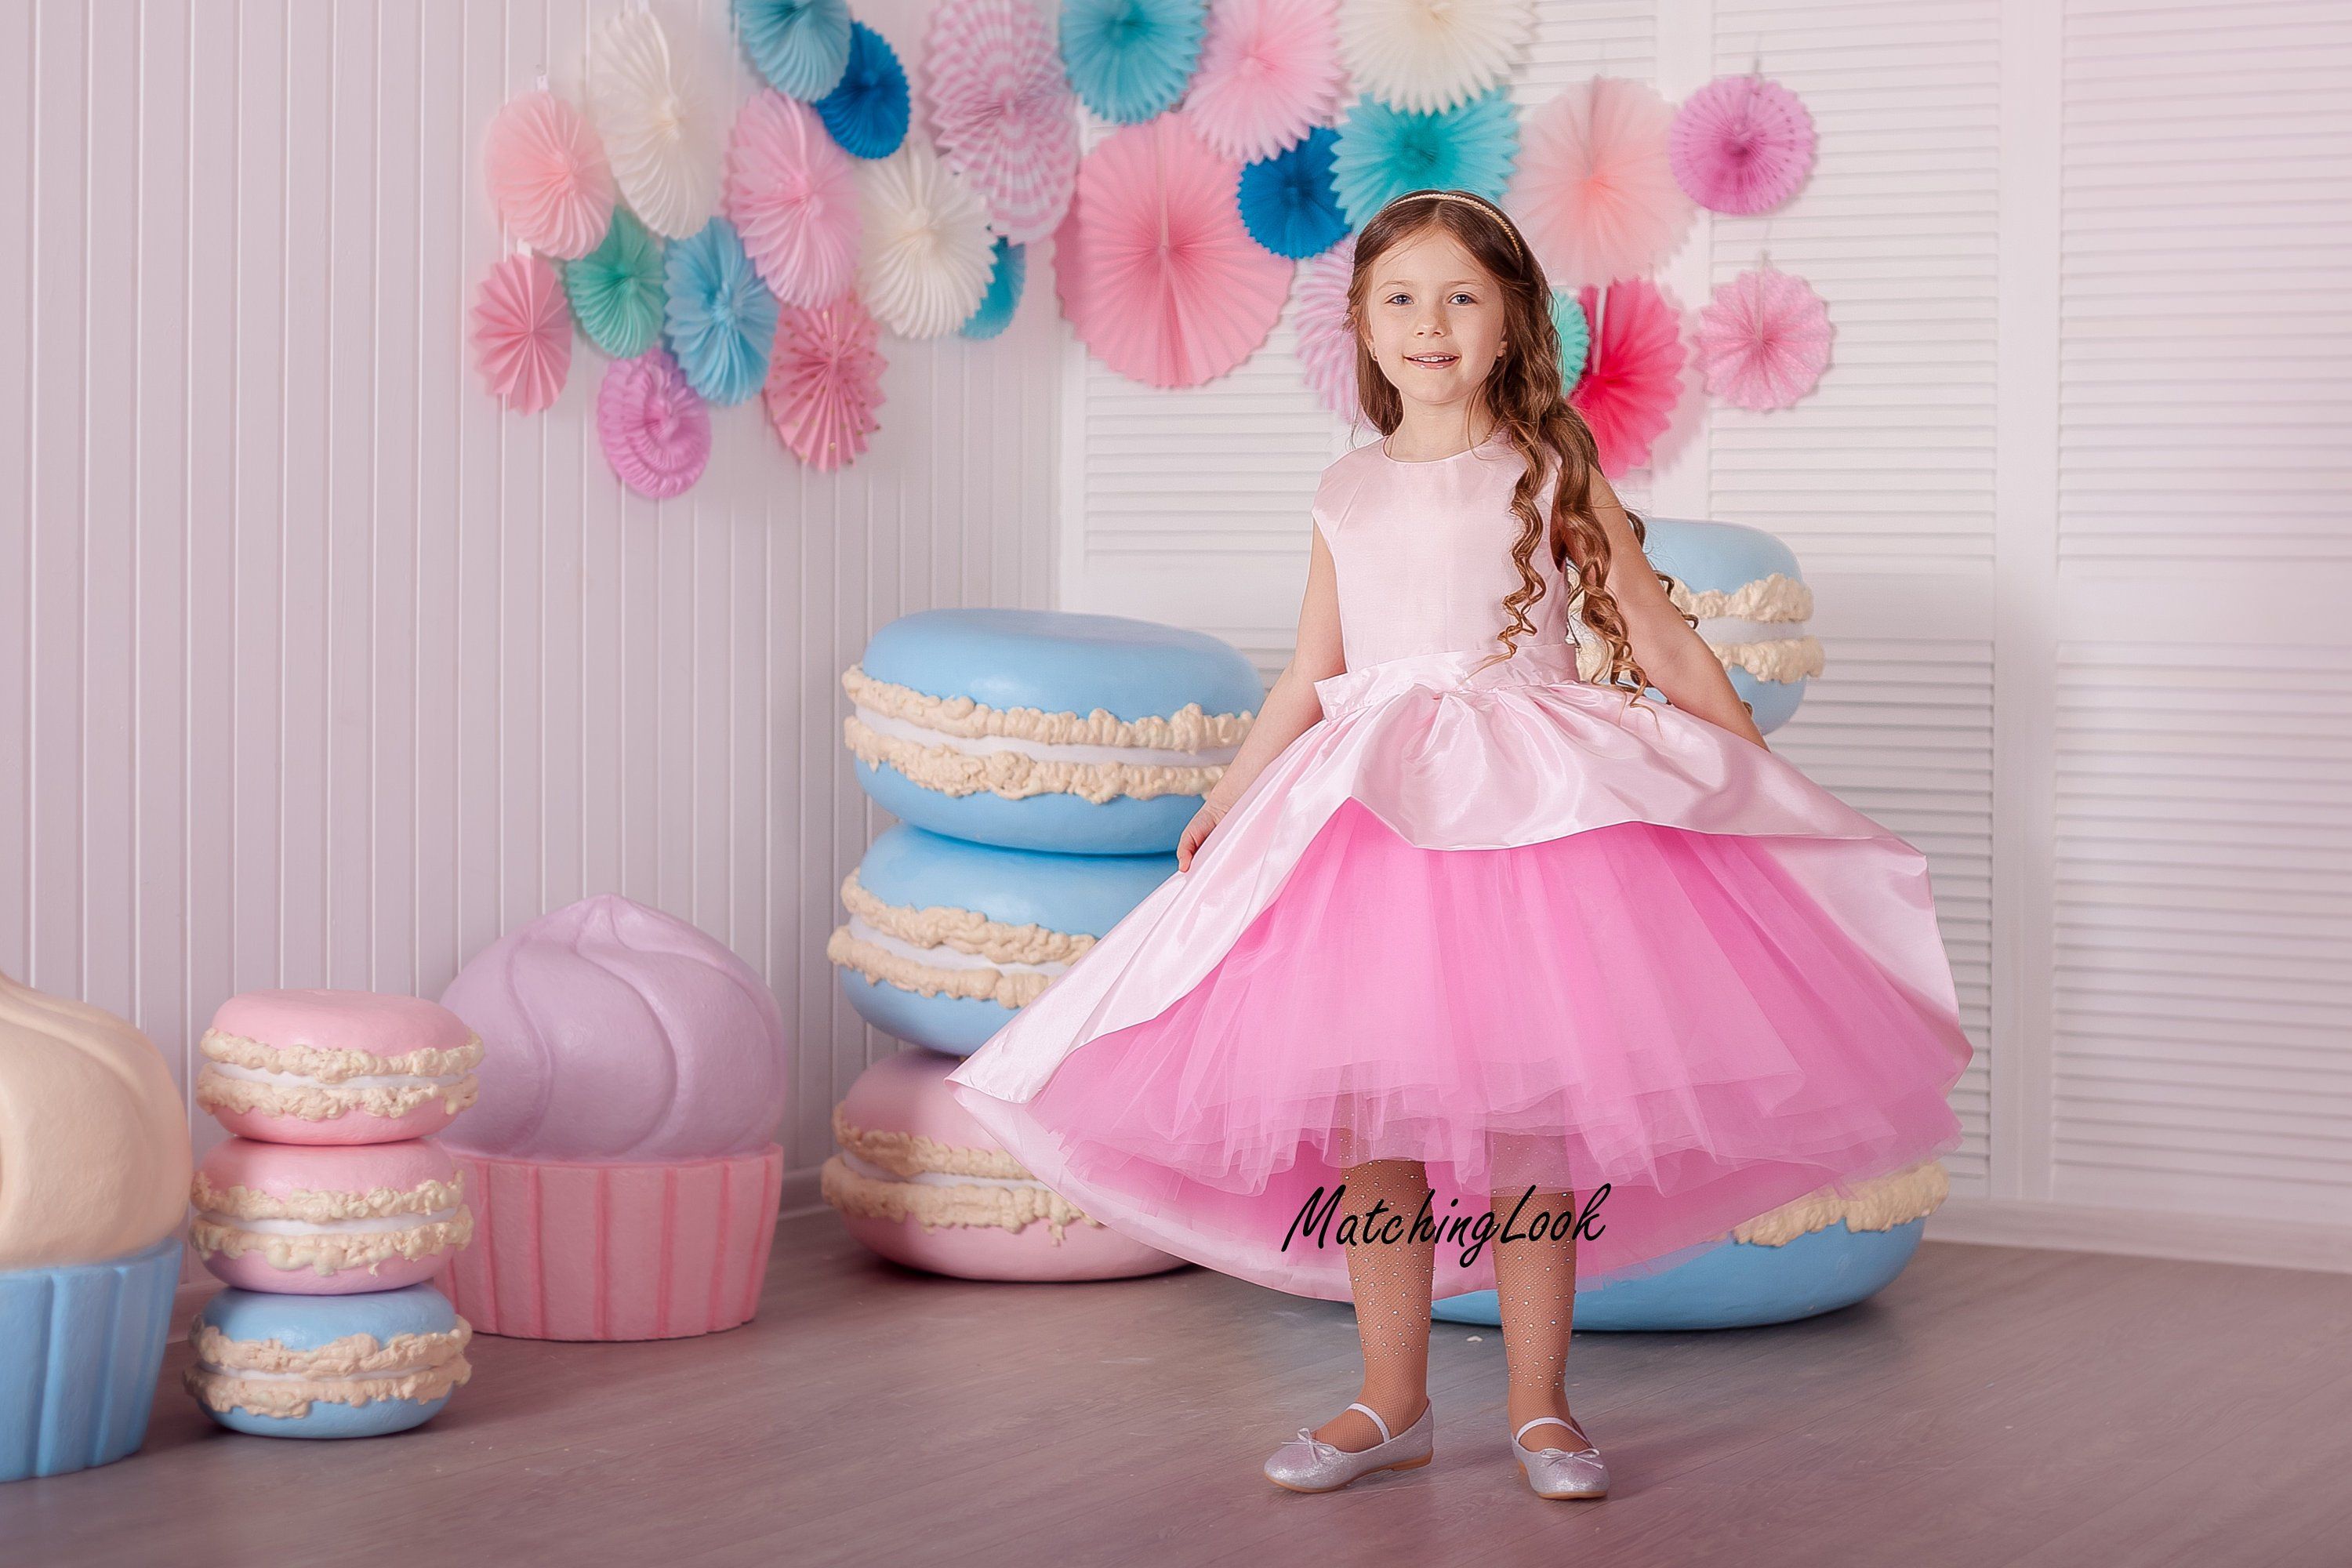 Pink Dress | Pink birthday dress, Birthday party outfits, Birthday dresses